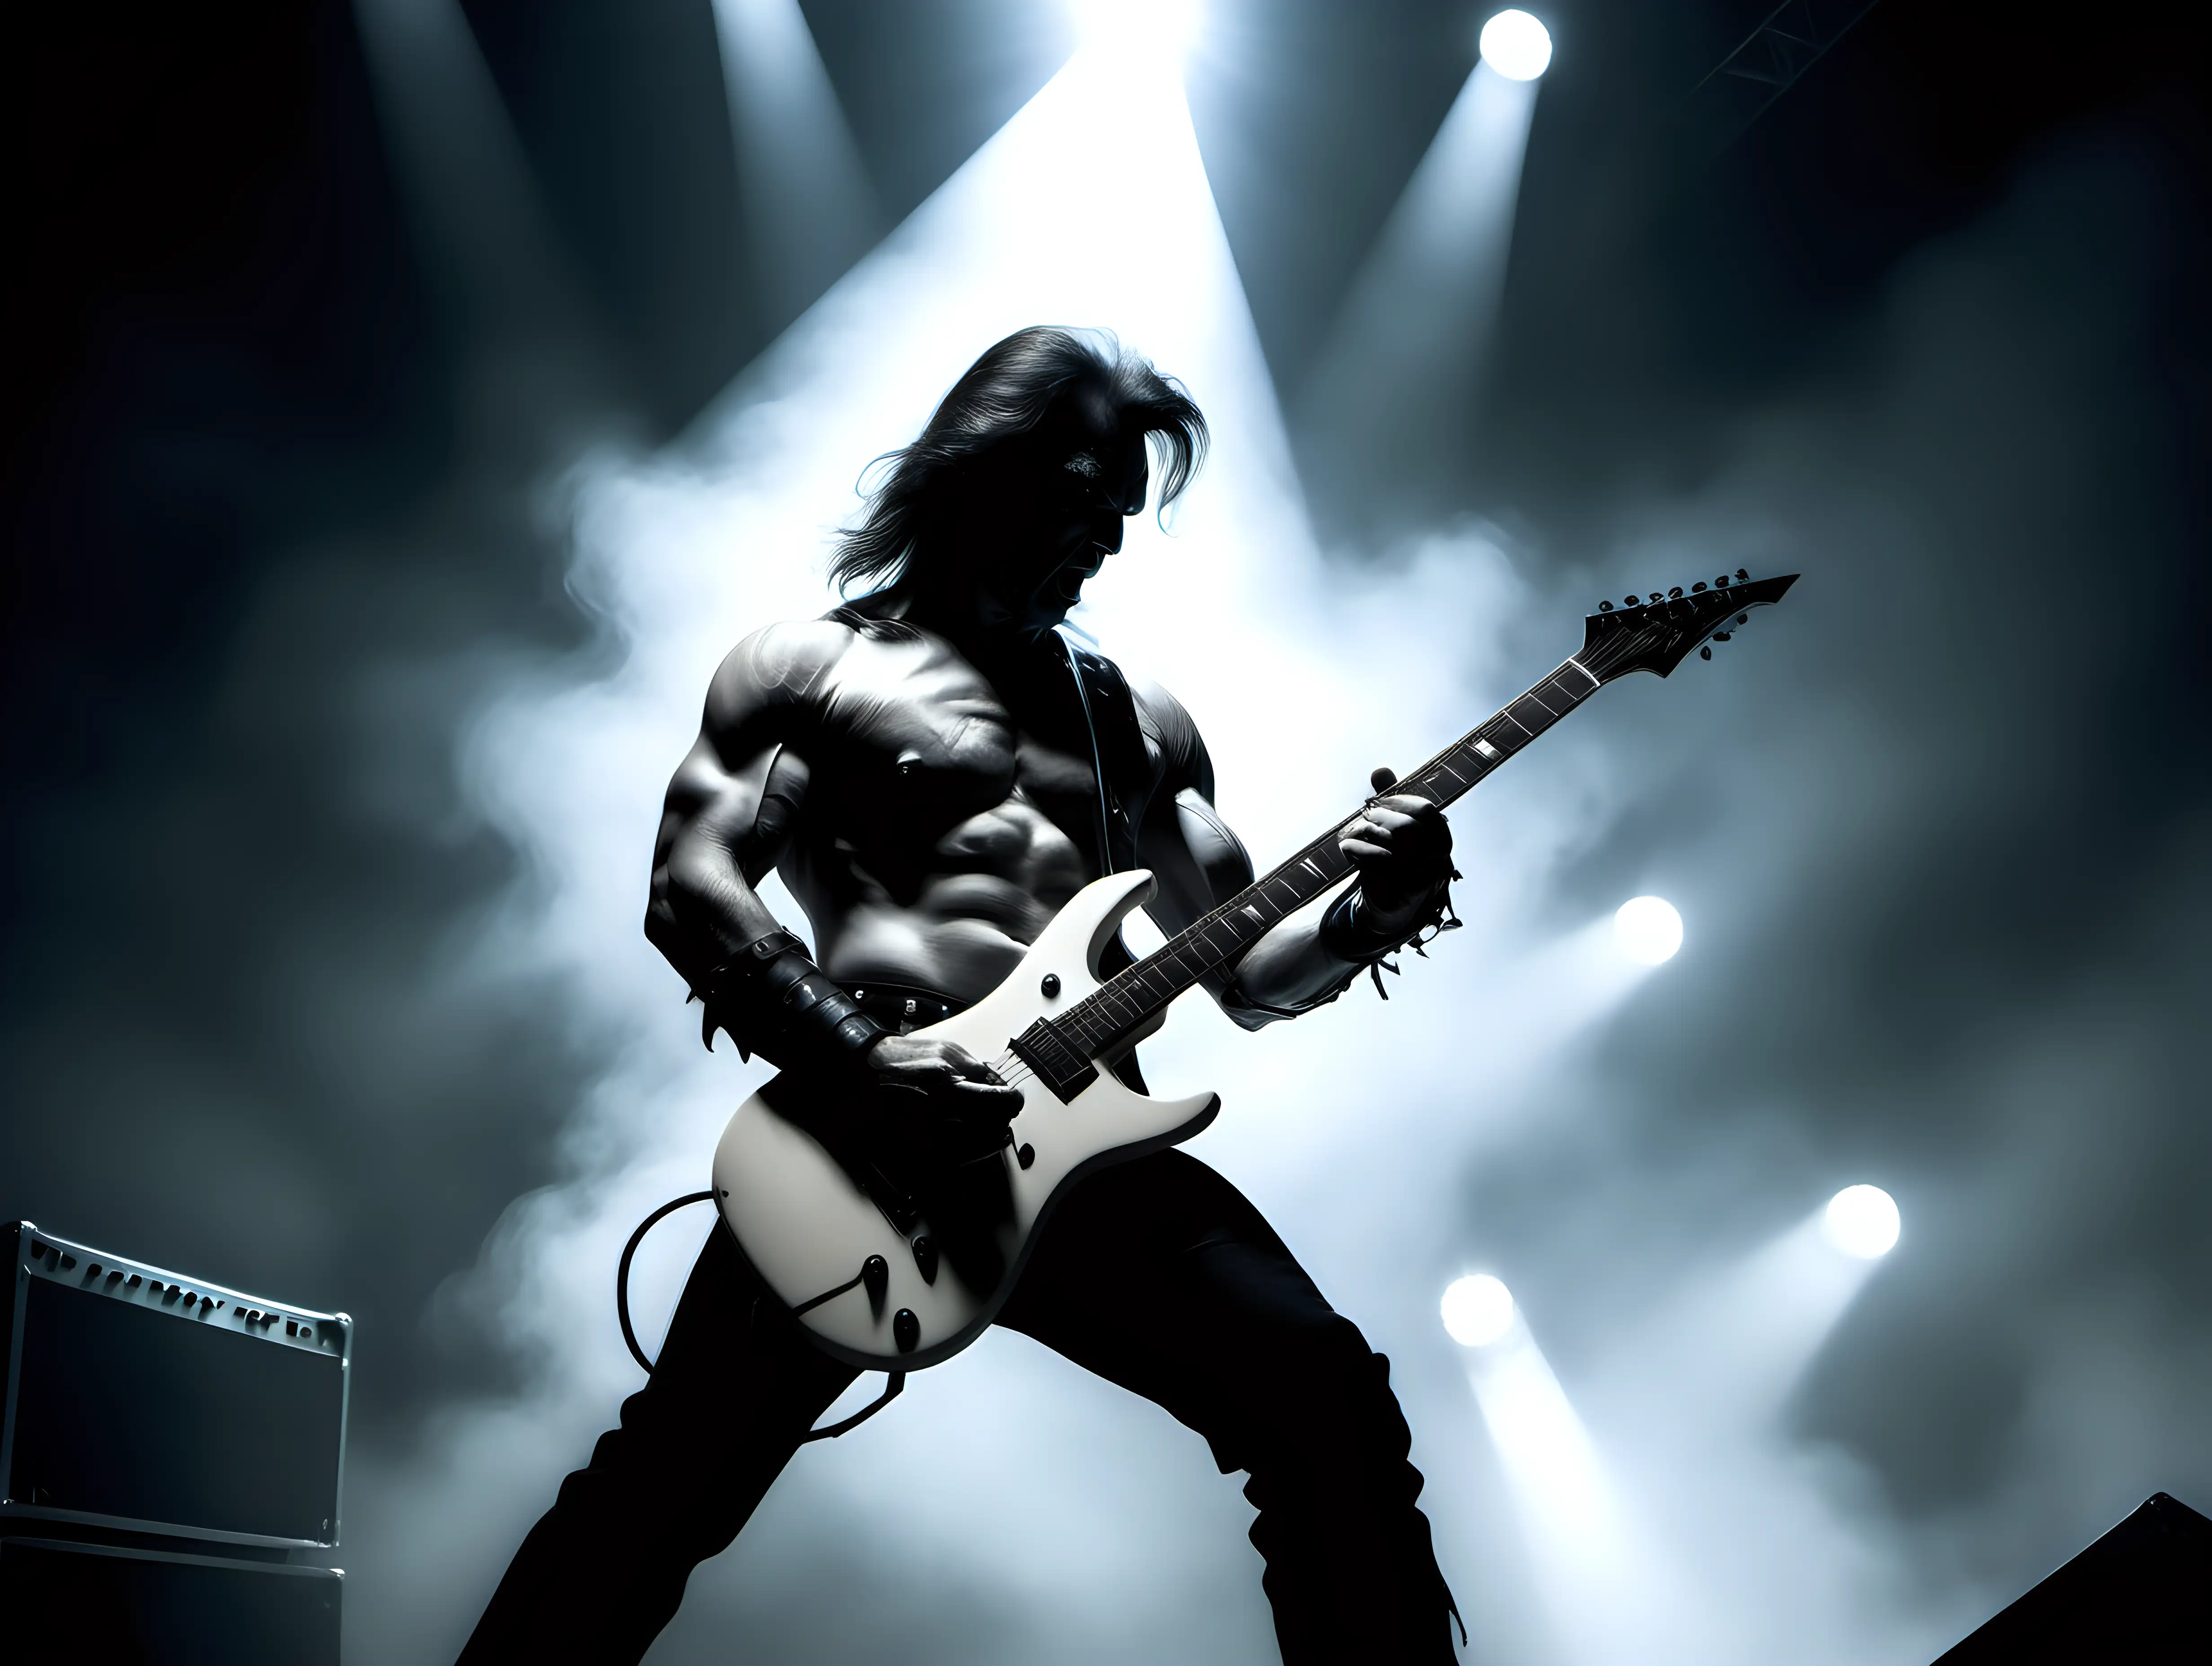 Heavy metal guitarist soloing on stage with white light coming from behind  Frank Frazetta style